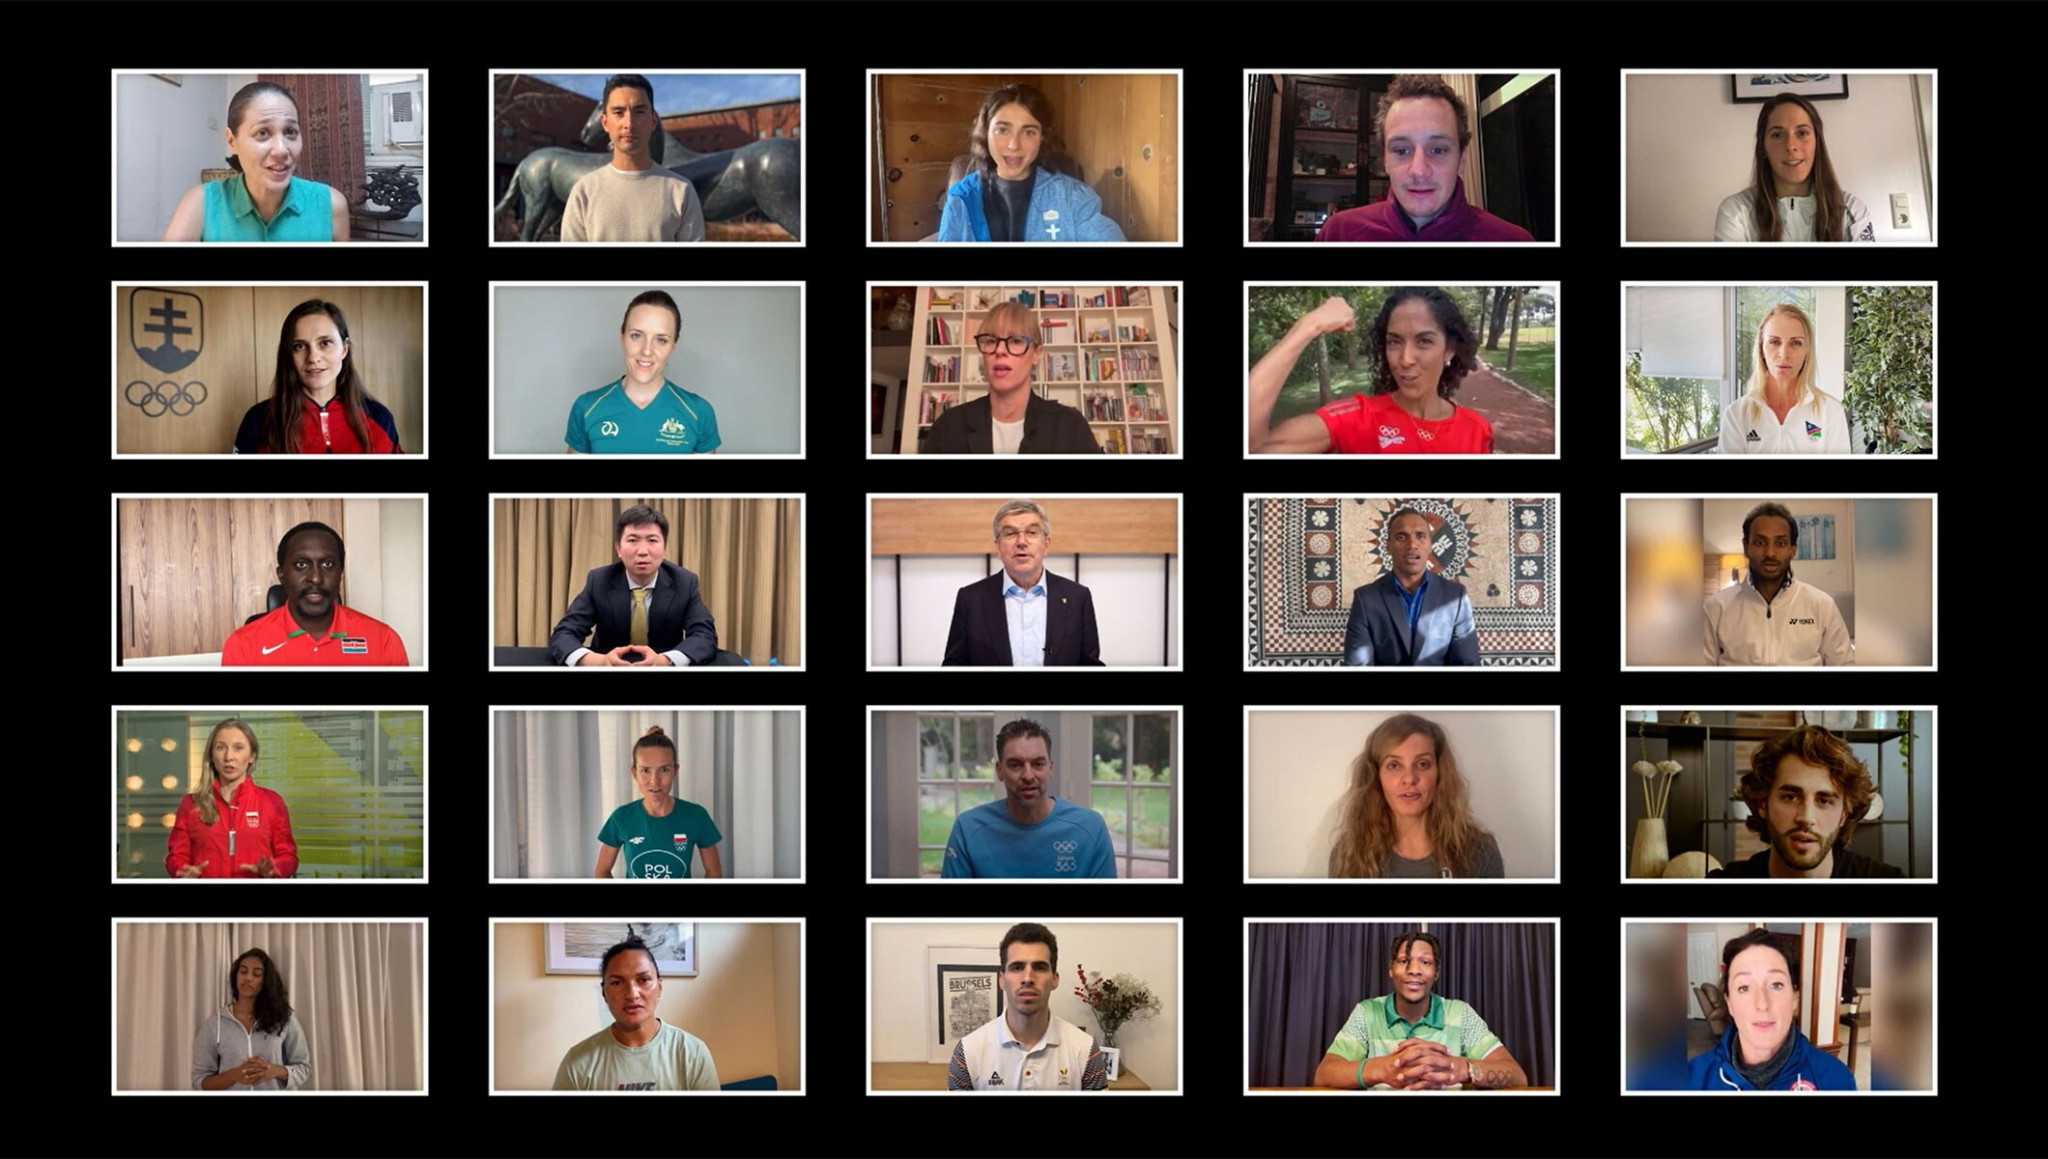 Athletes use video to call on world leaders to ensure free and equal access to coronavirus vaccines